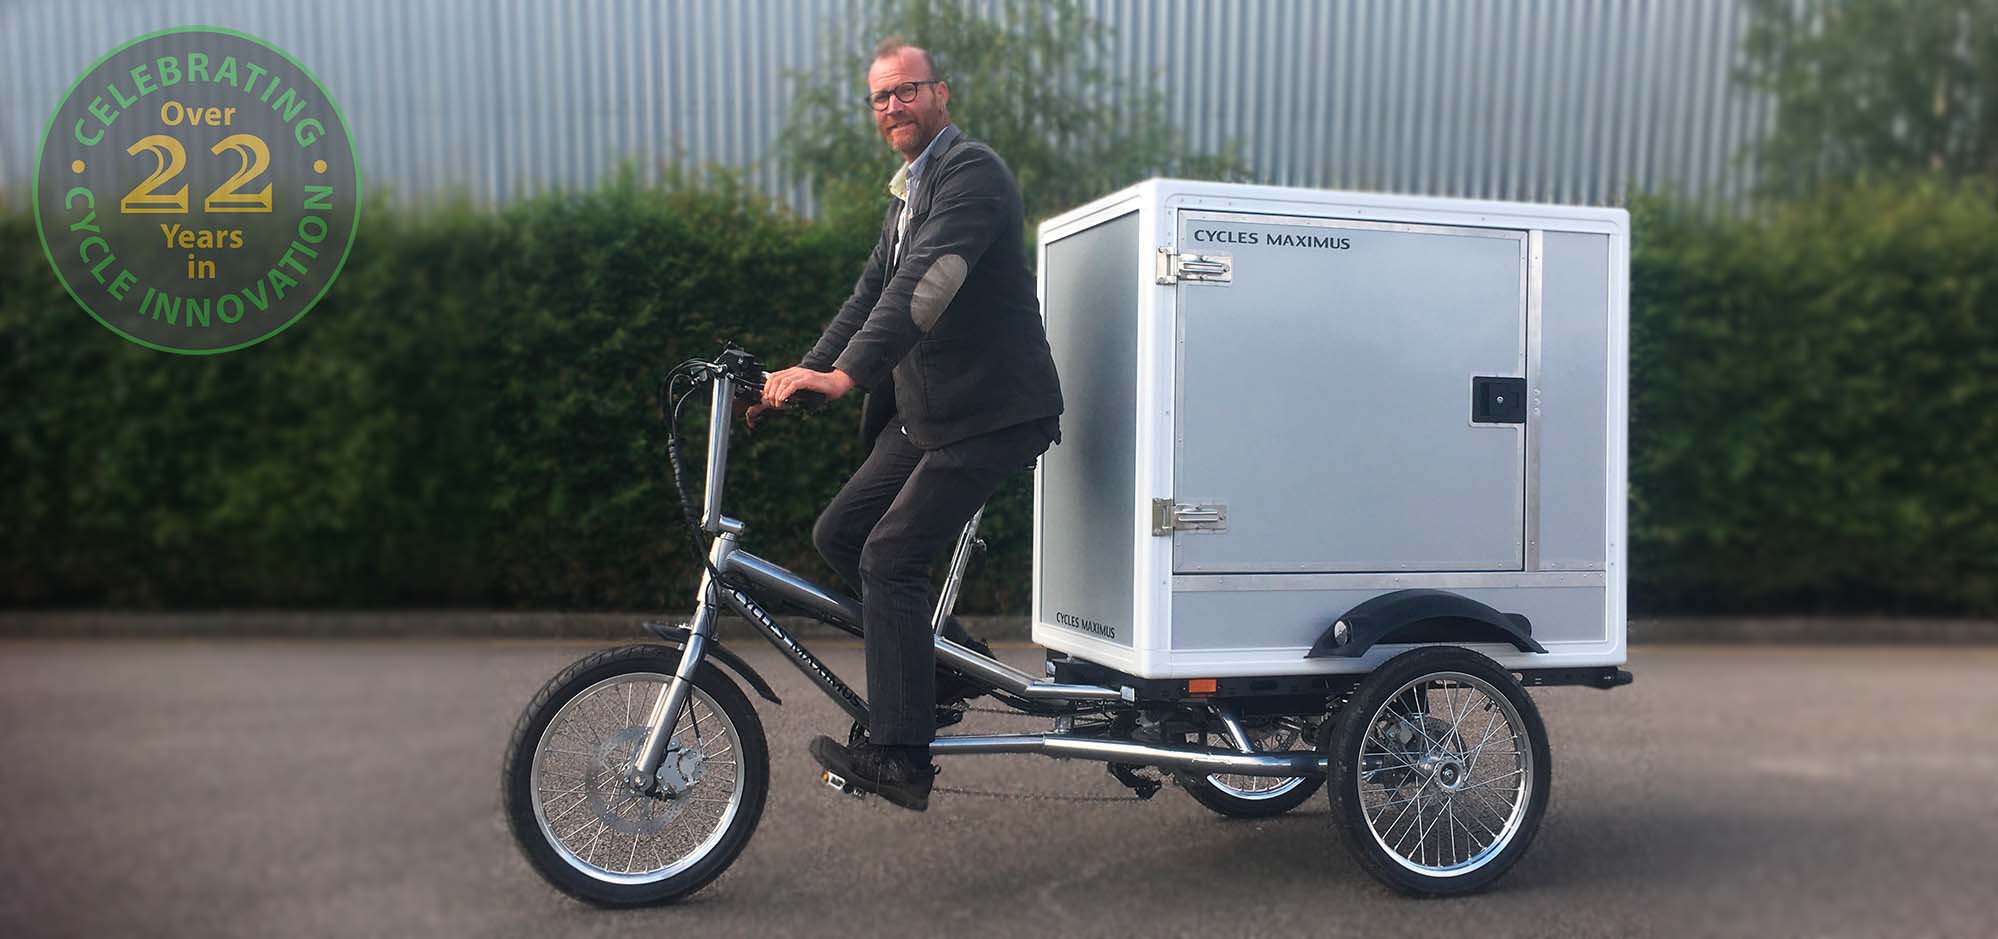 electric cargo trike for sale